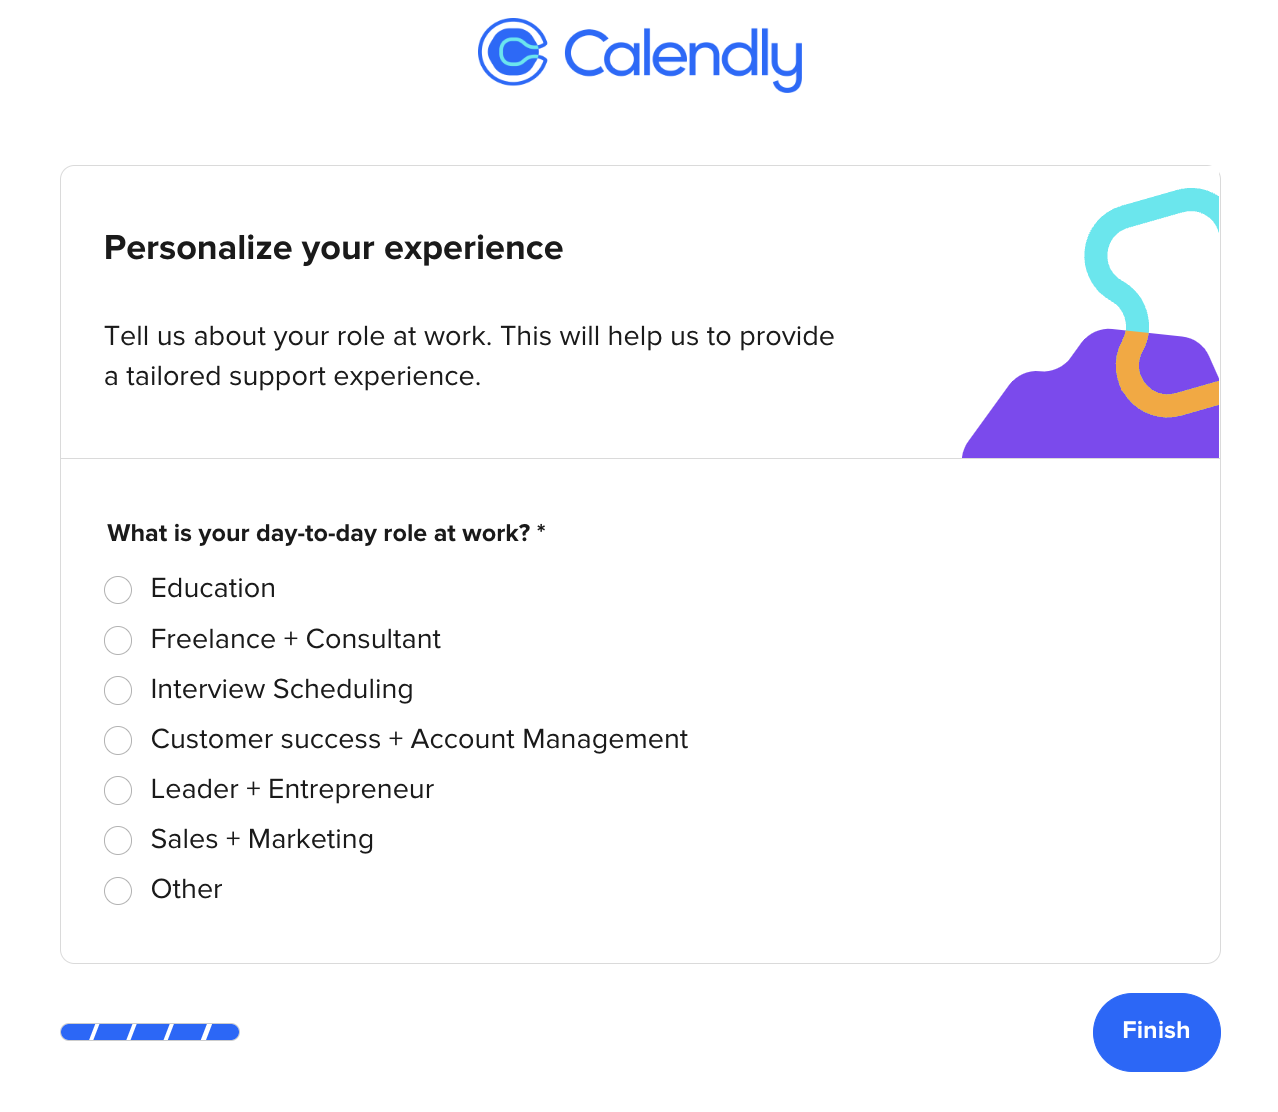 How to personalize your Calendly experience in the initial account setup.